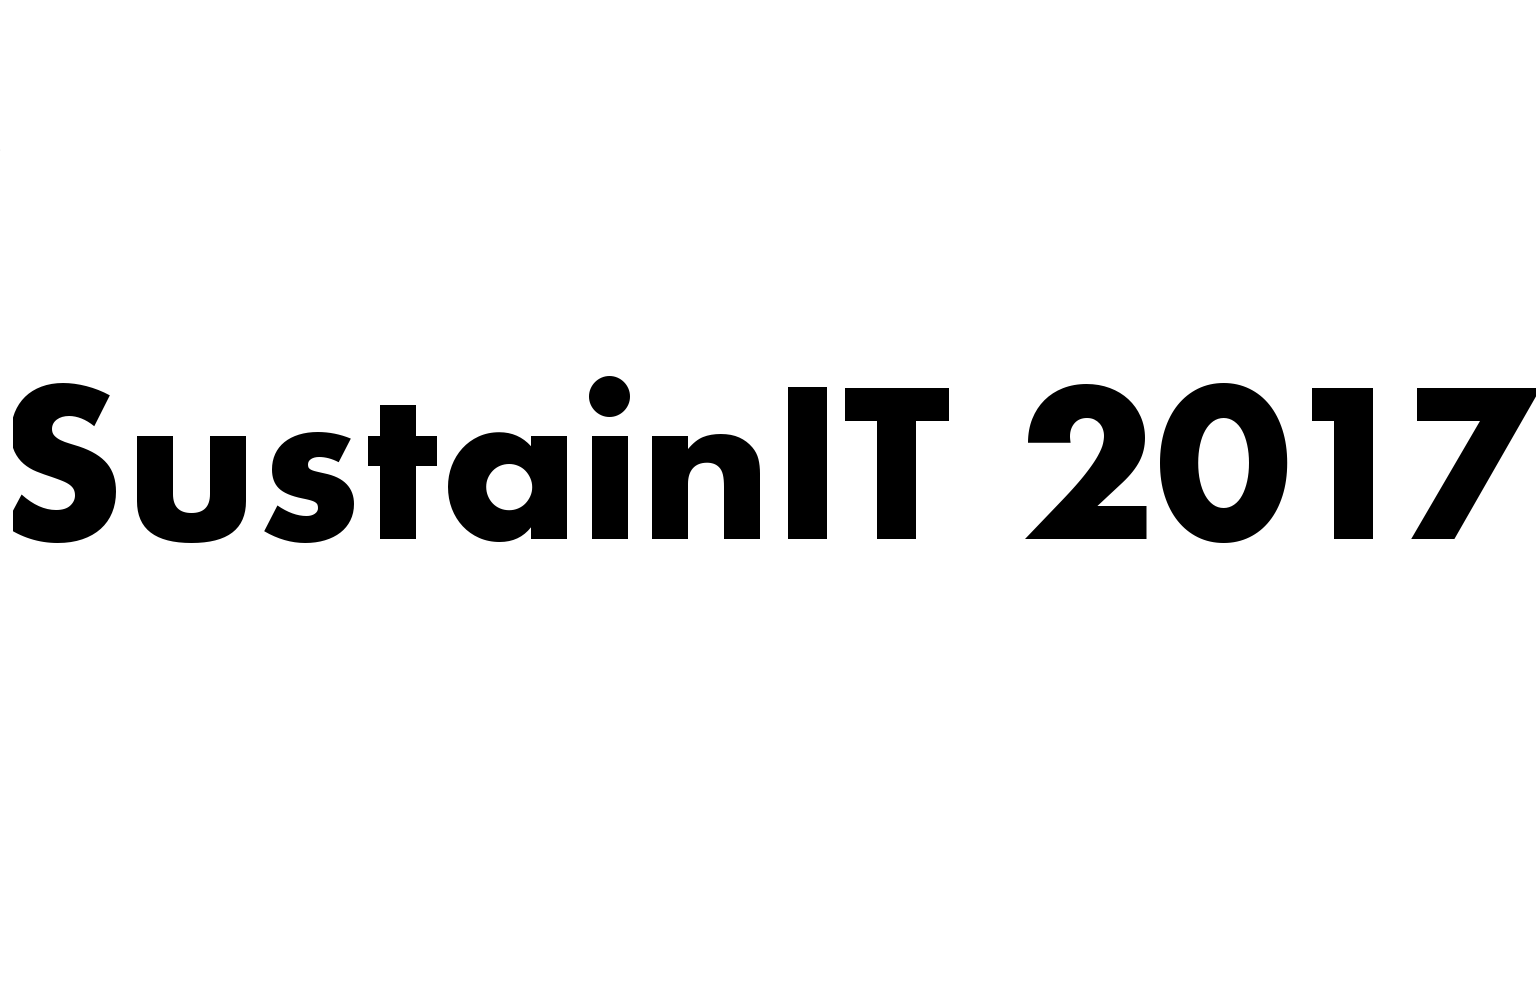 The 5th Conference on Sustainable Internet and ICT for Sustainability